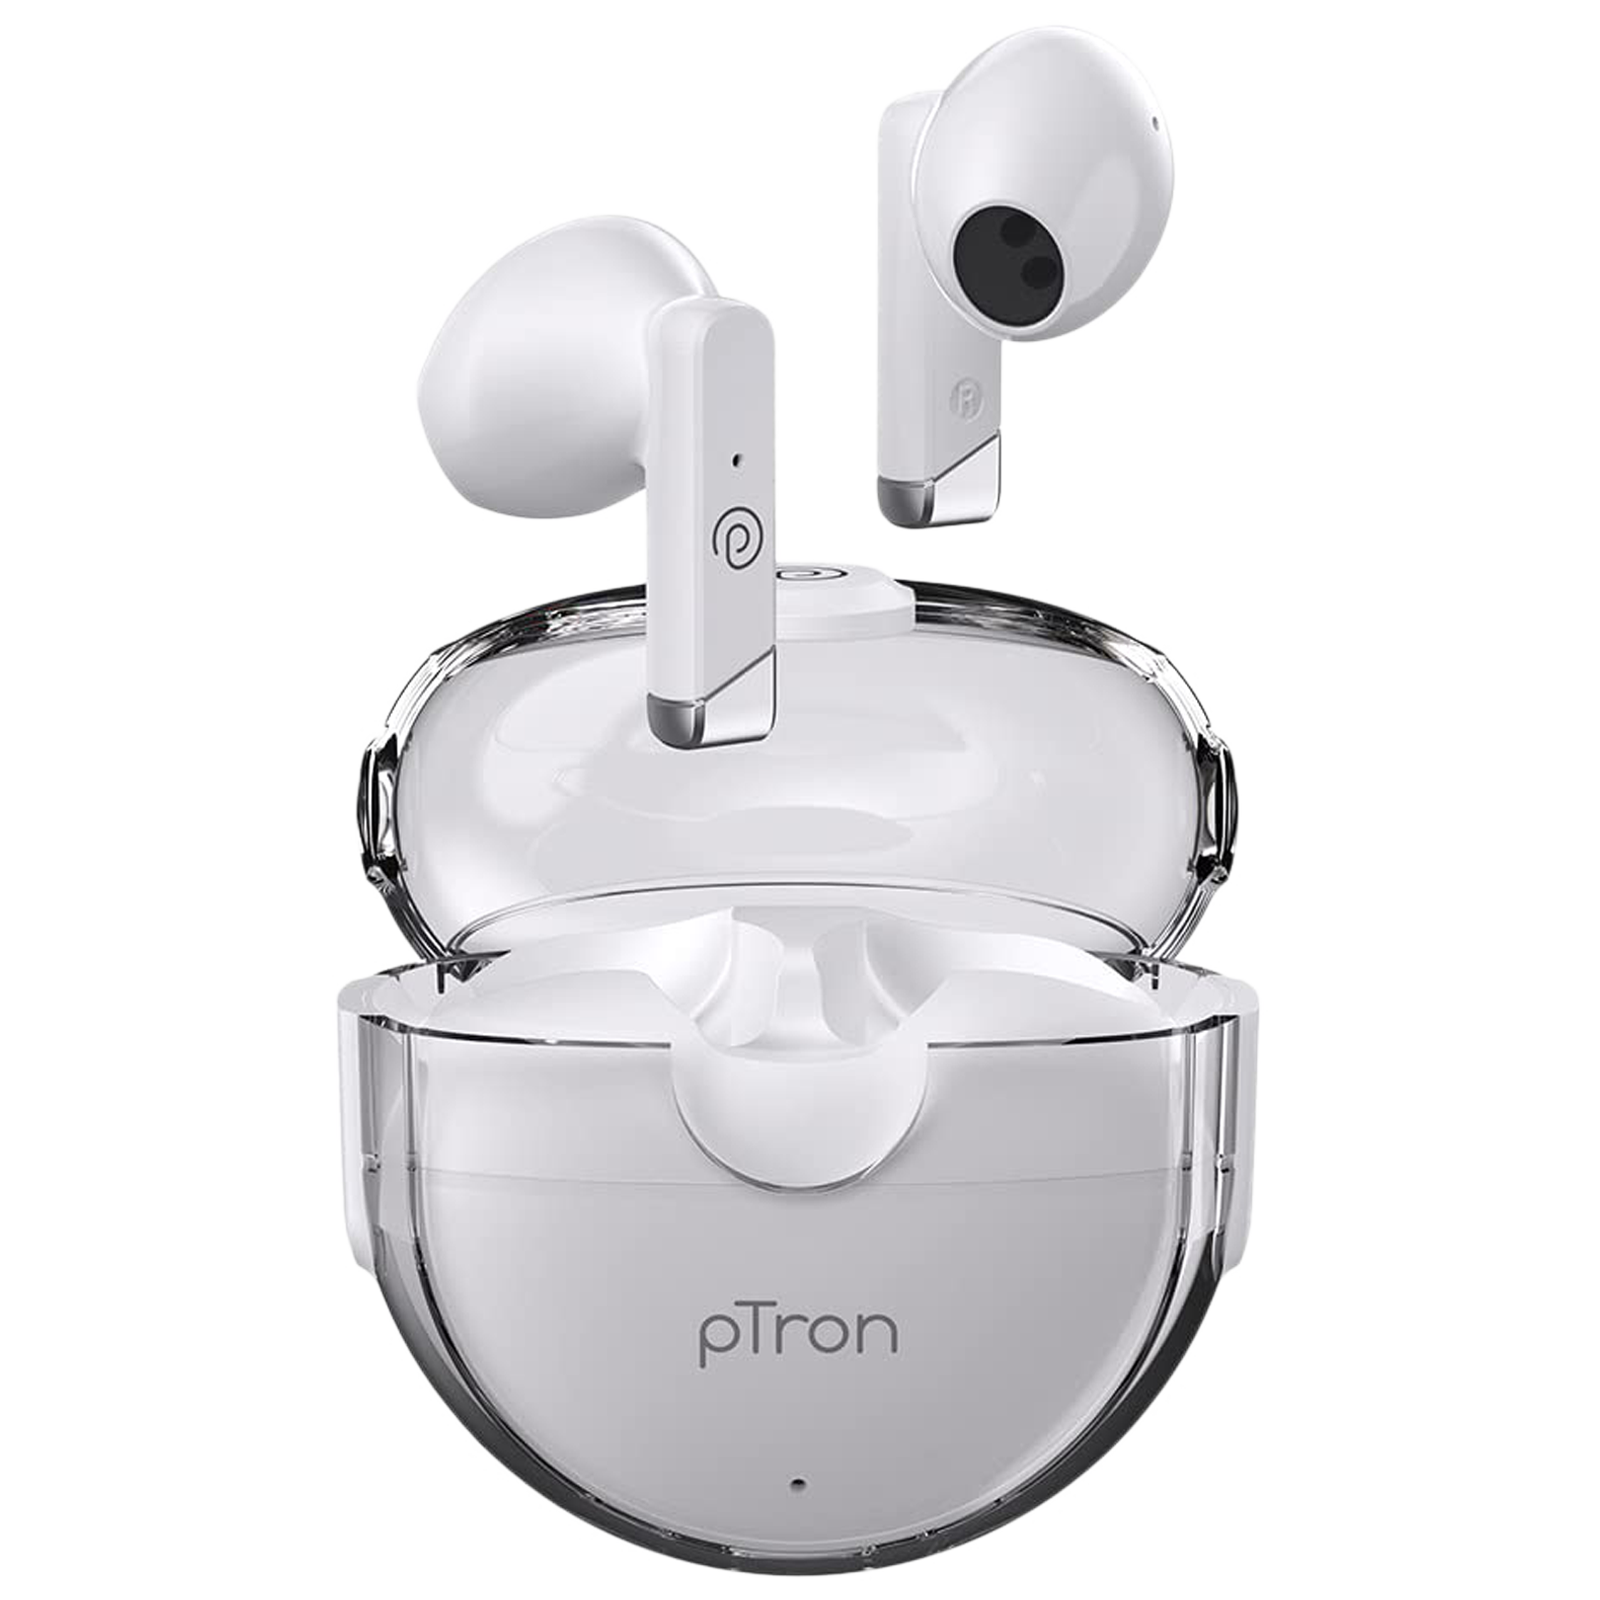 pTron Bassbuds Fute 140318216 TWS Earbuds with Passive Noise Cancellation (IPX4 Water Resistant, Immersive Audio, White)